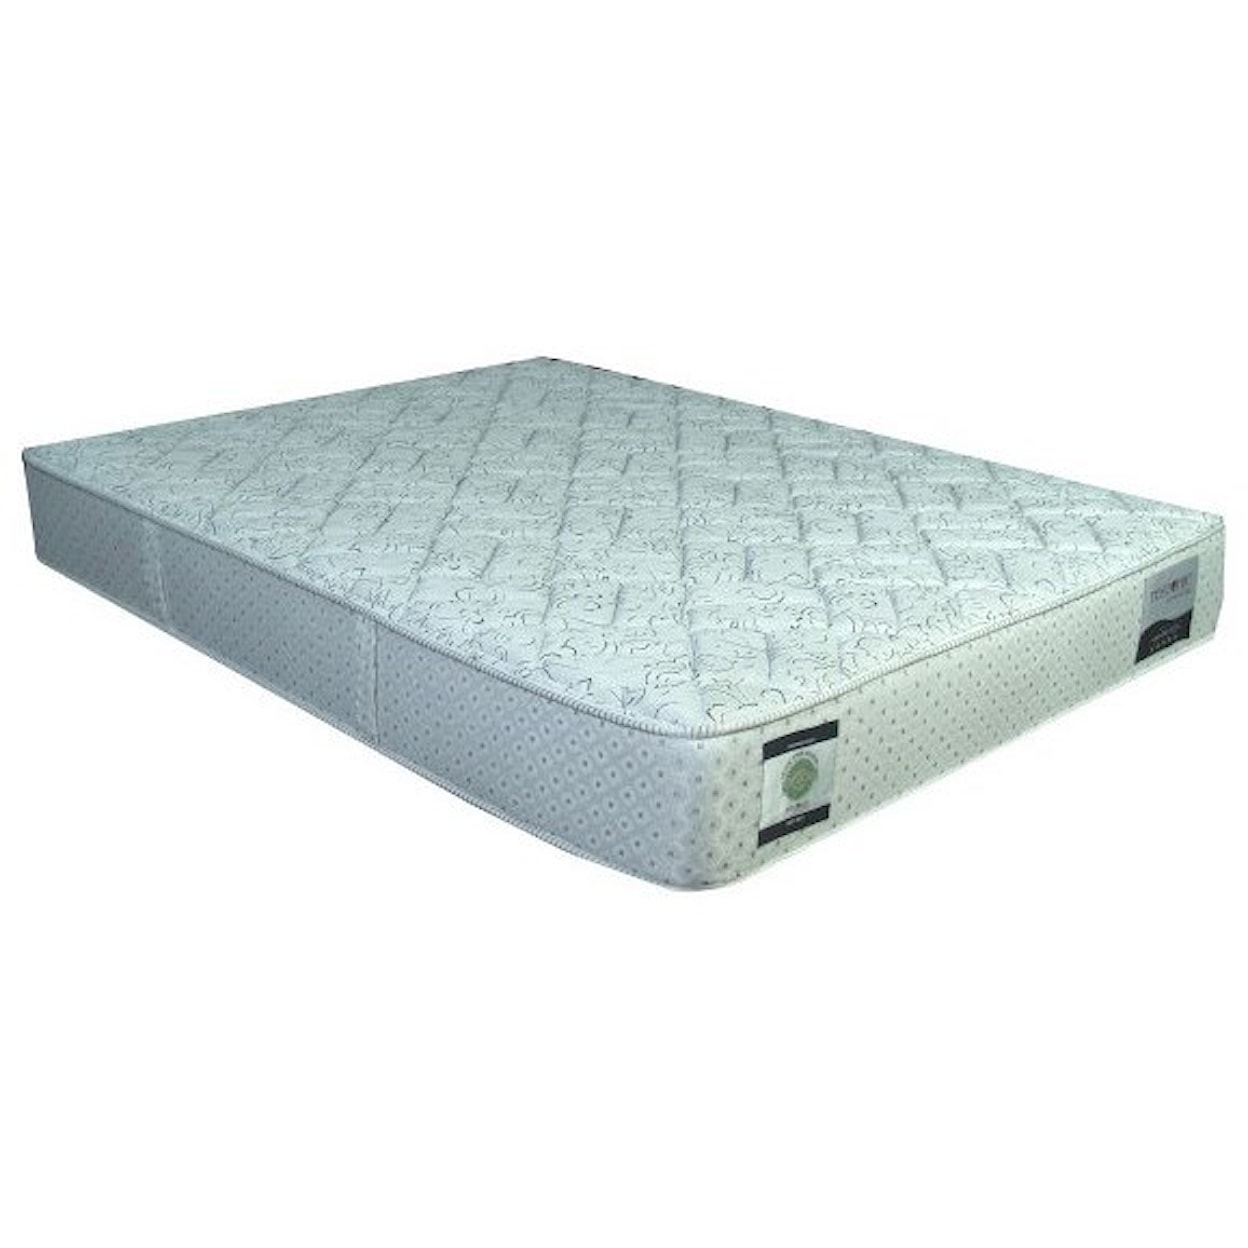 Restonic CC Linwood Firm Full 12" Firm Two Sided Mattress